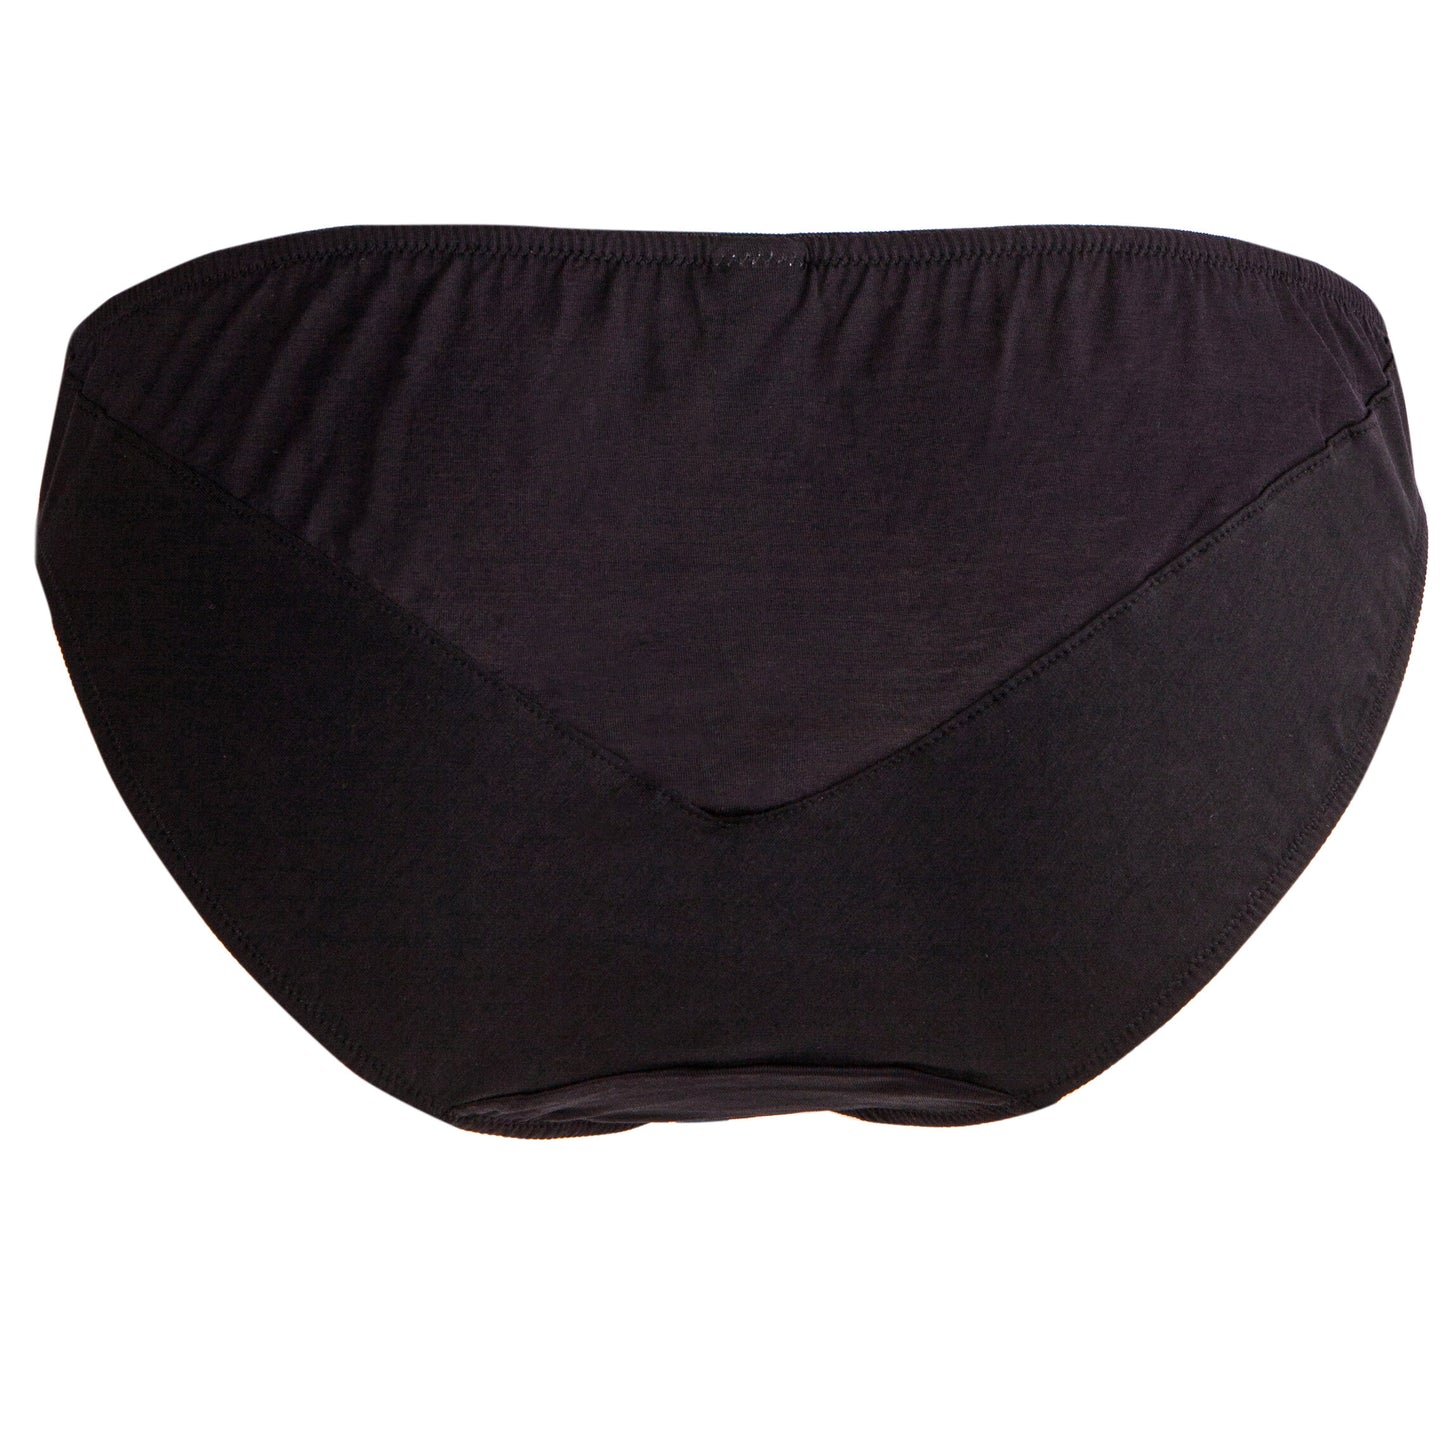 ORGANIC COTTON ANGLED BRIEF, BLACK, Product code 22-24-143